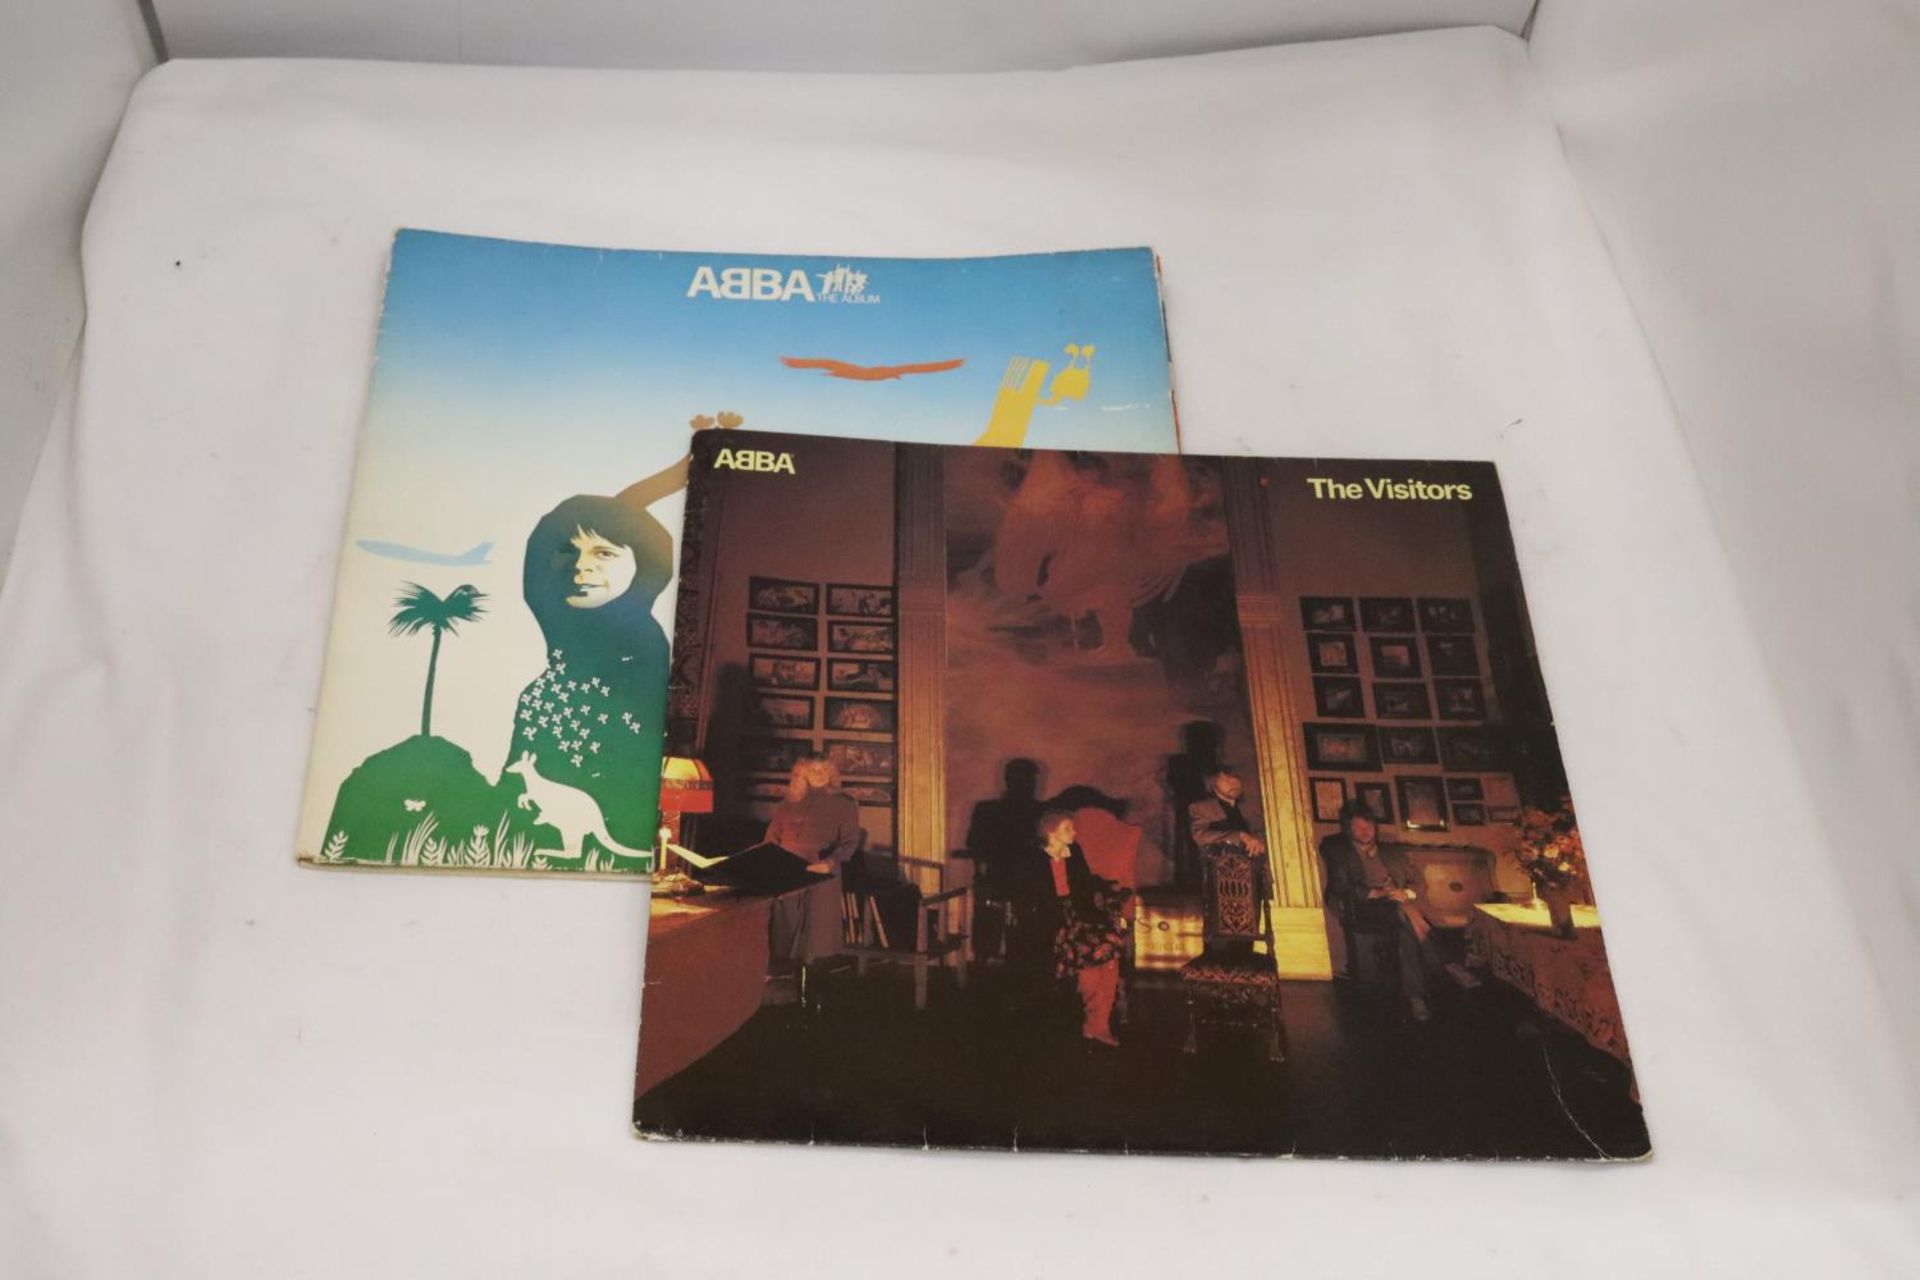 TWO ABBA ALBUMS - 1977 ABBA THE ALBUM AND 1981 THE VISITORS - Image 2 of 4